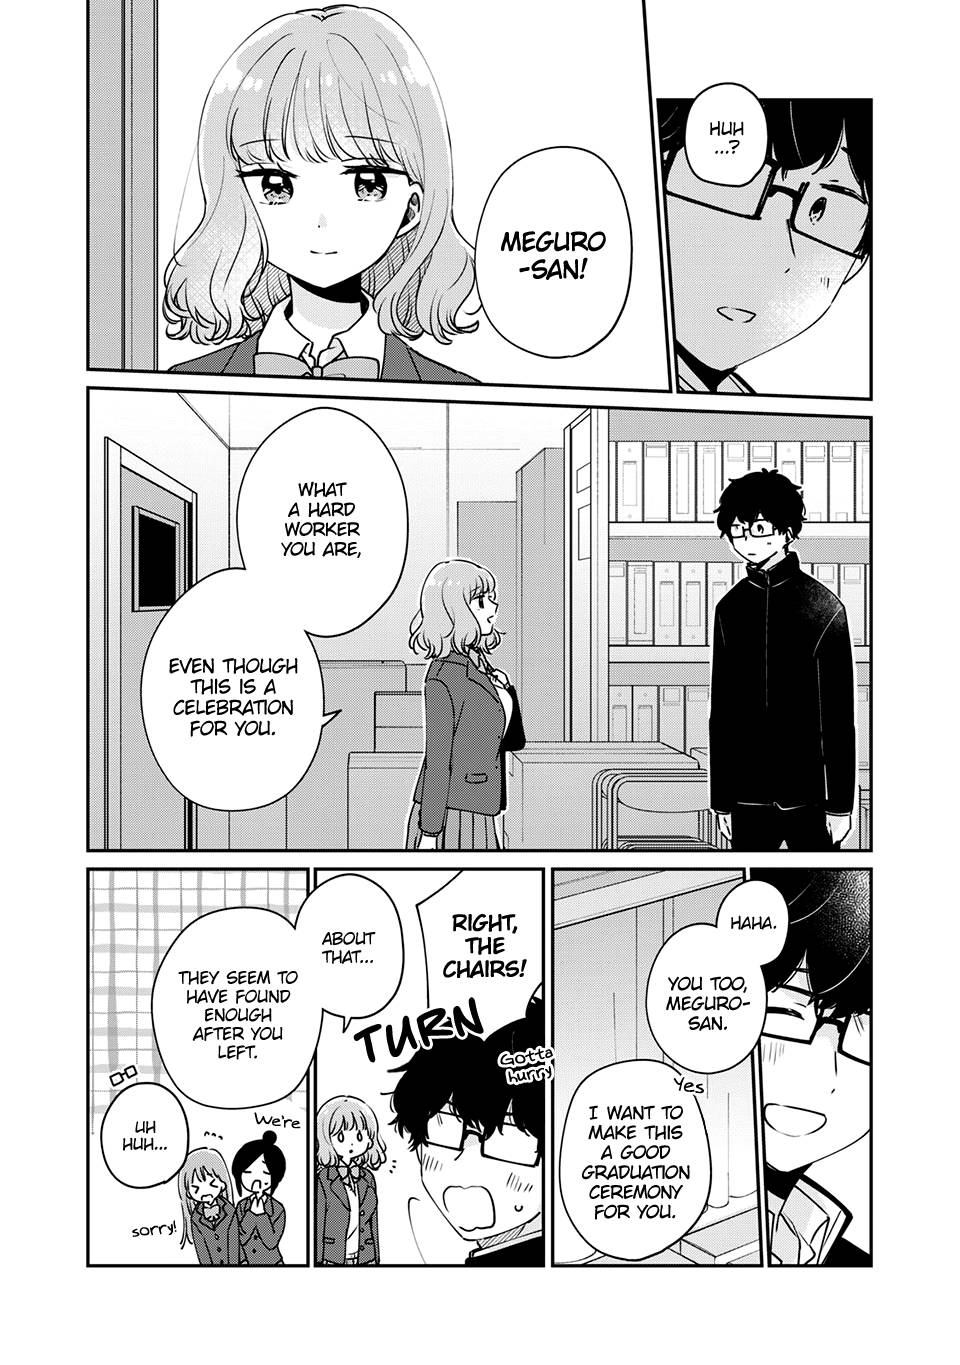 It's Not Meguro-san's First Time chapter 45 page 13